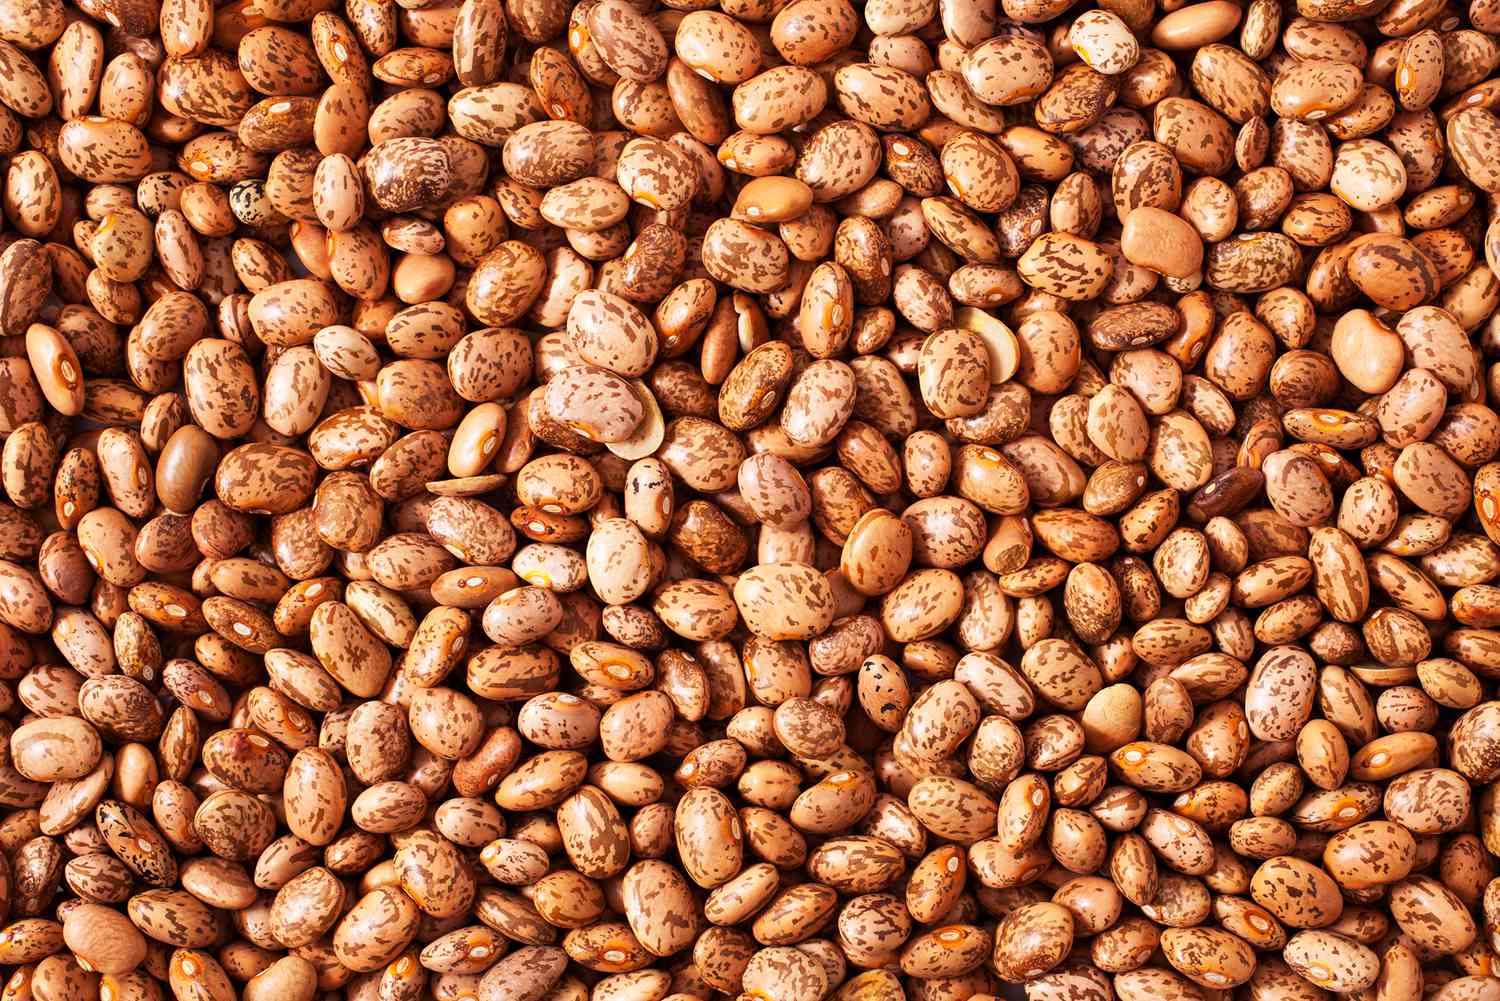 Are Pinto Beans Healthy? Here's What a Dietitian Has to Say ...